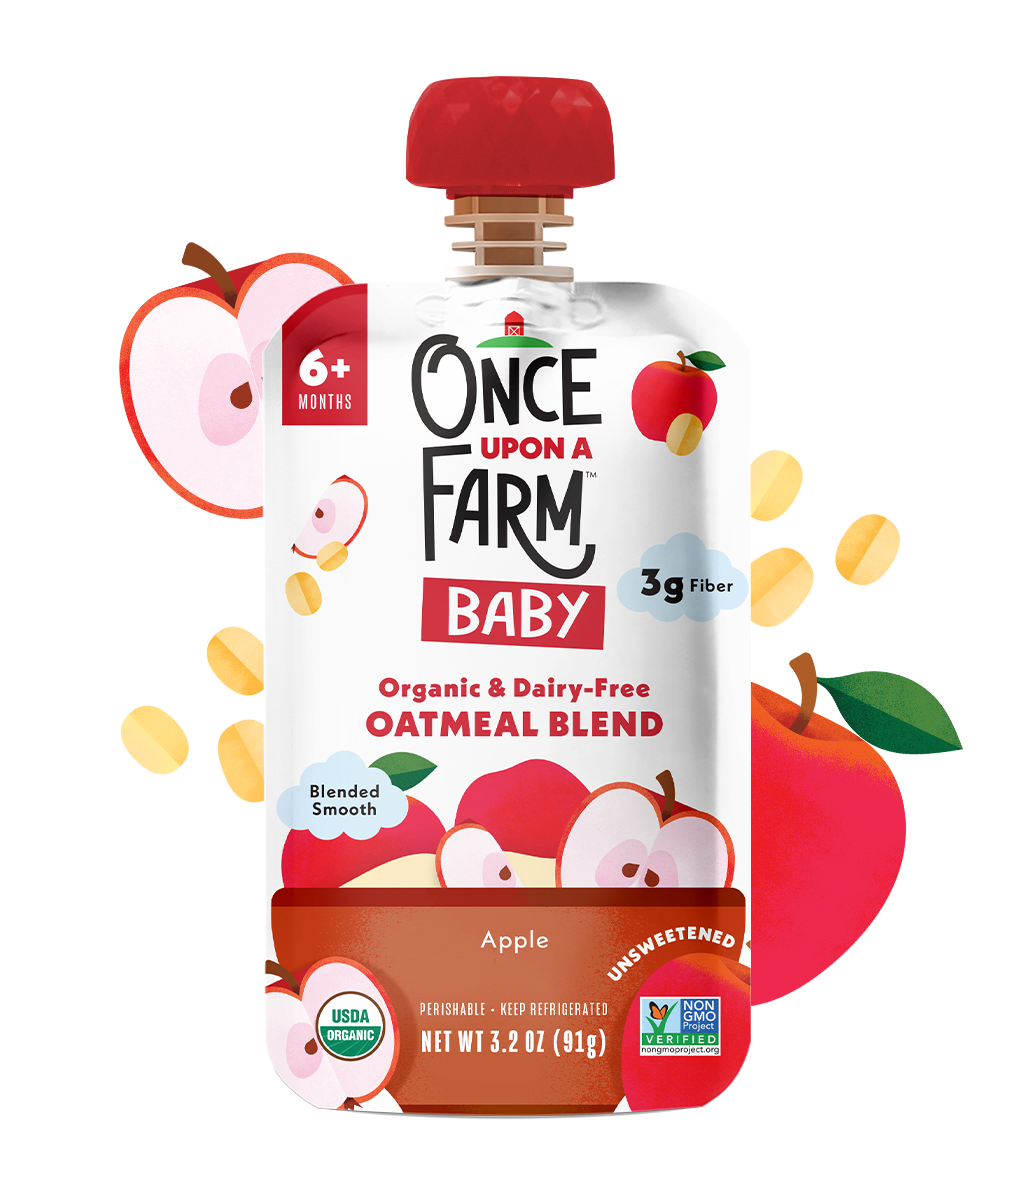 Top Ten Baby Items For The First Six Months - Pink Oatmeal